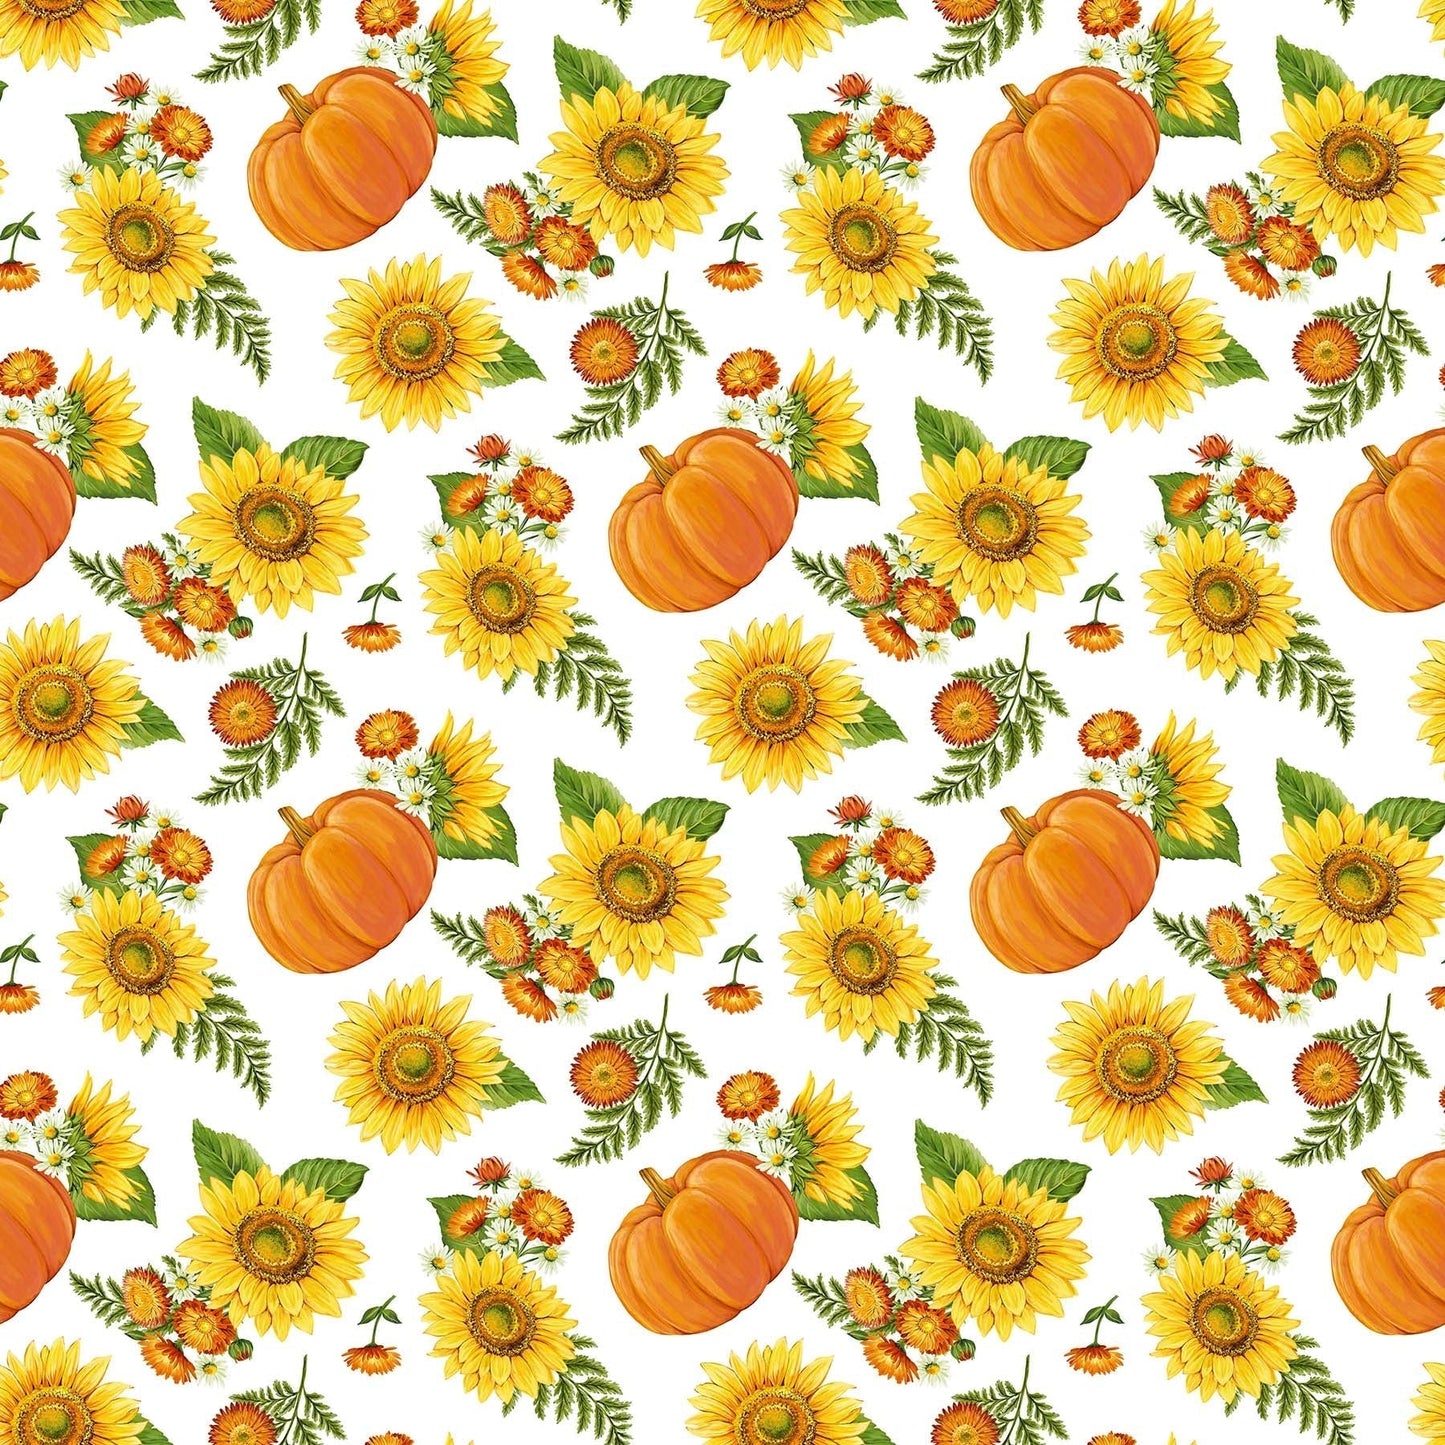 Northcott Fabric by the Yard Sunshine Harvest Daisies on Green Floral Cotton 25458-78